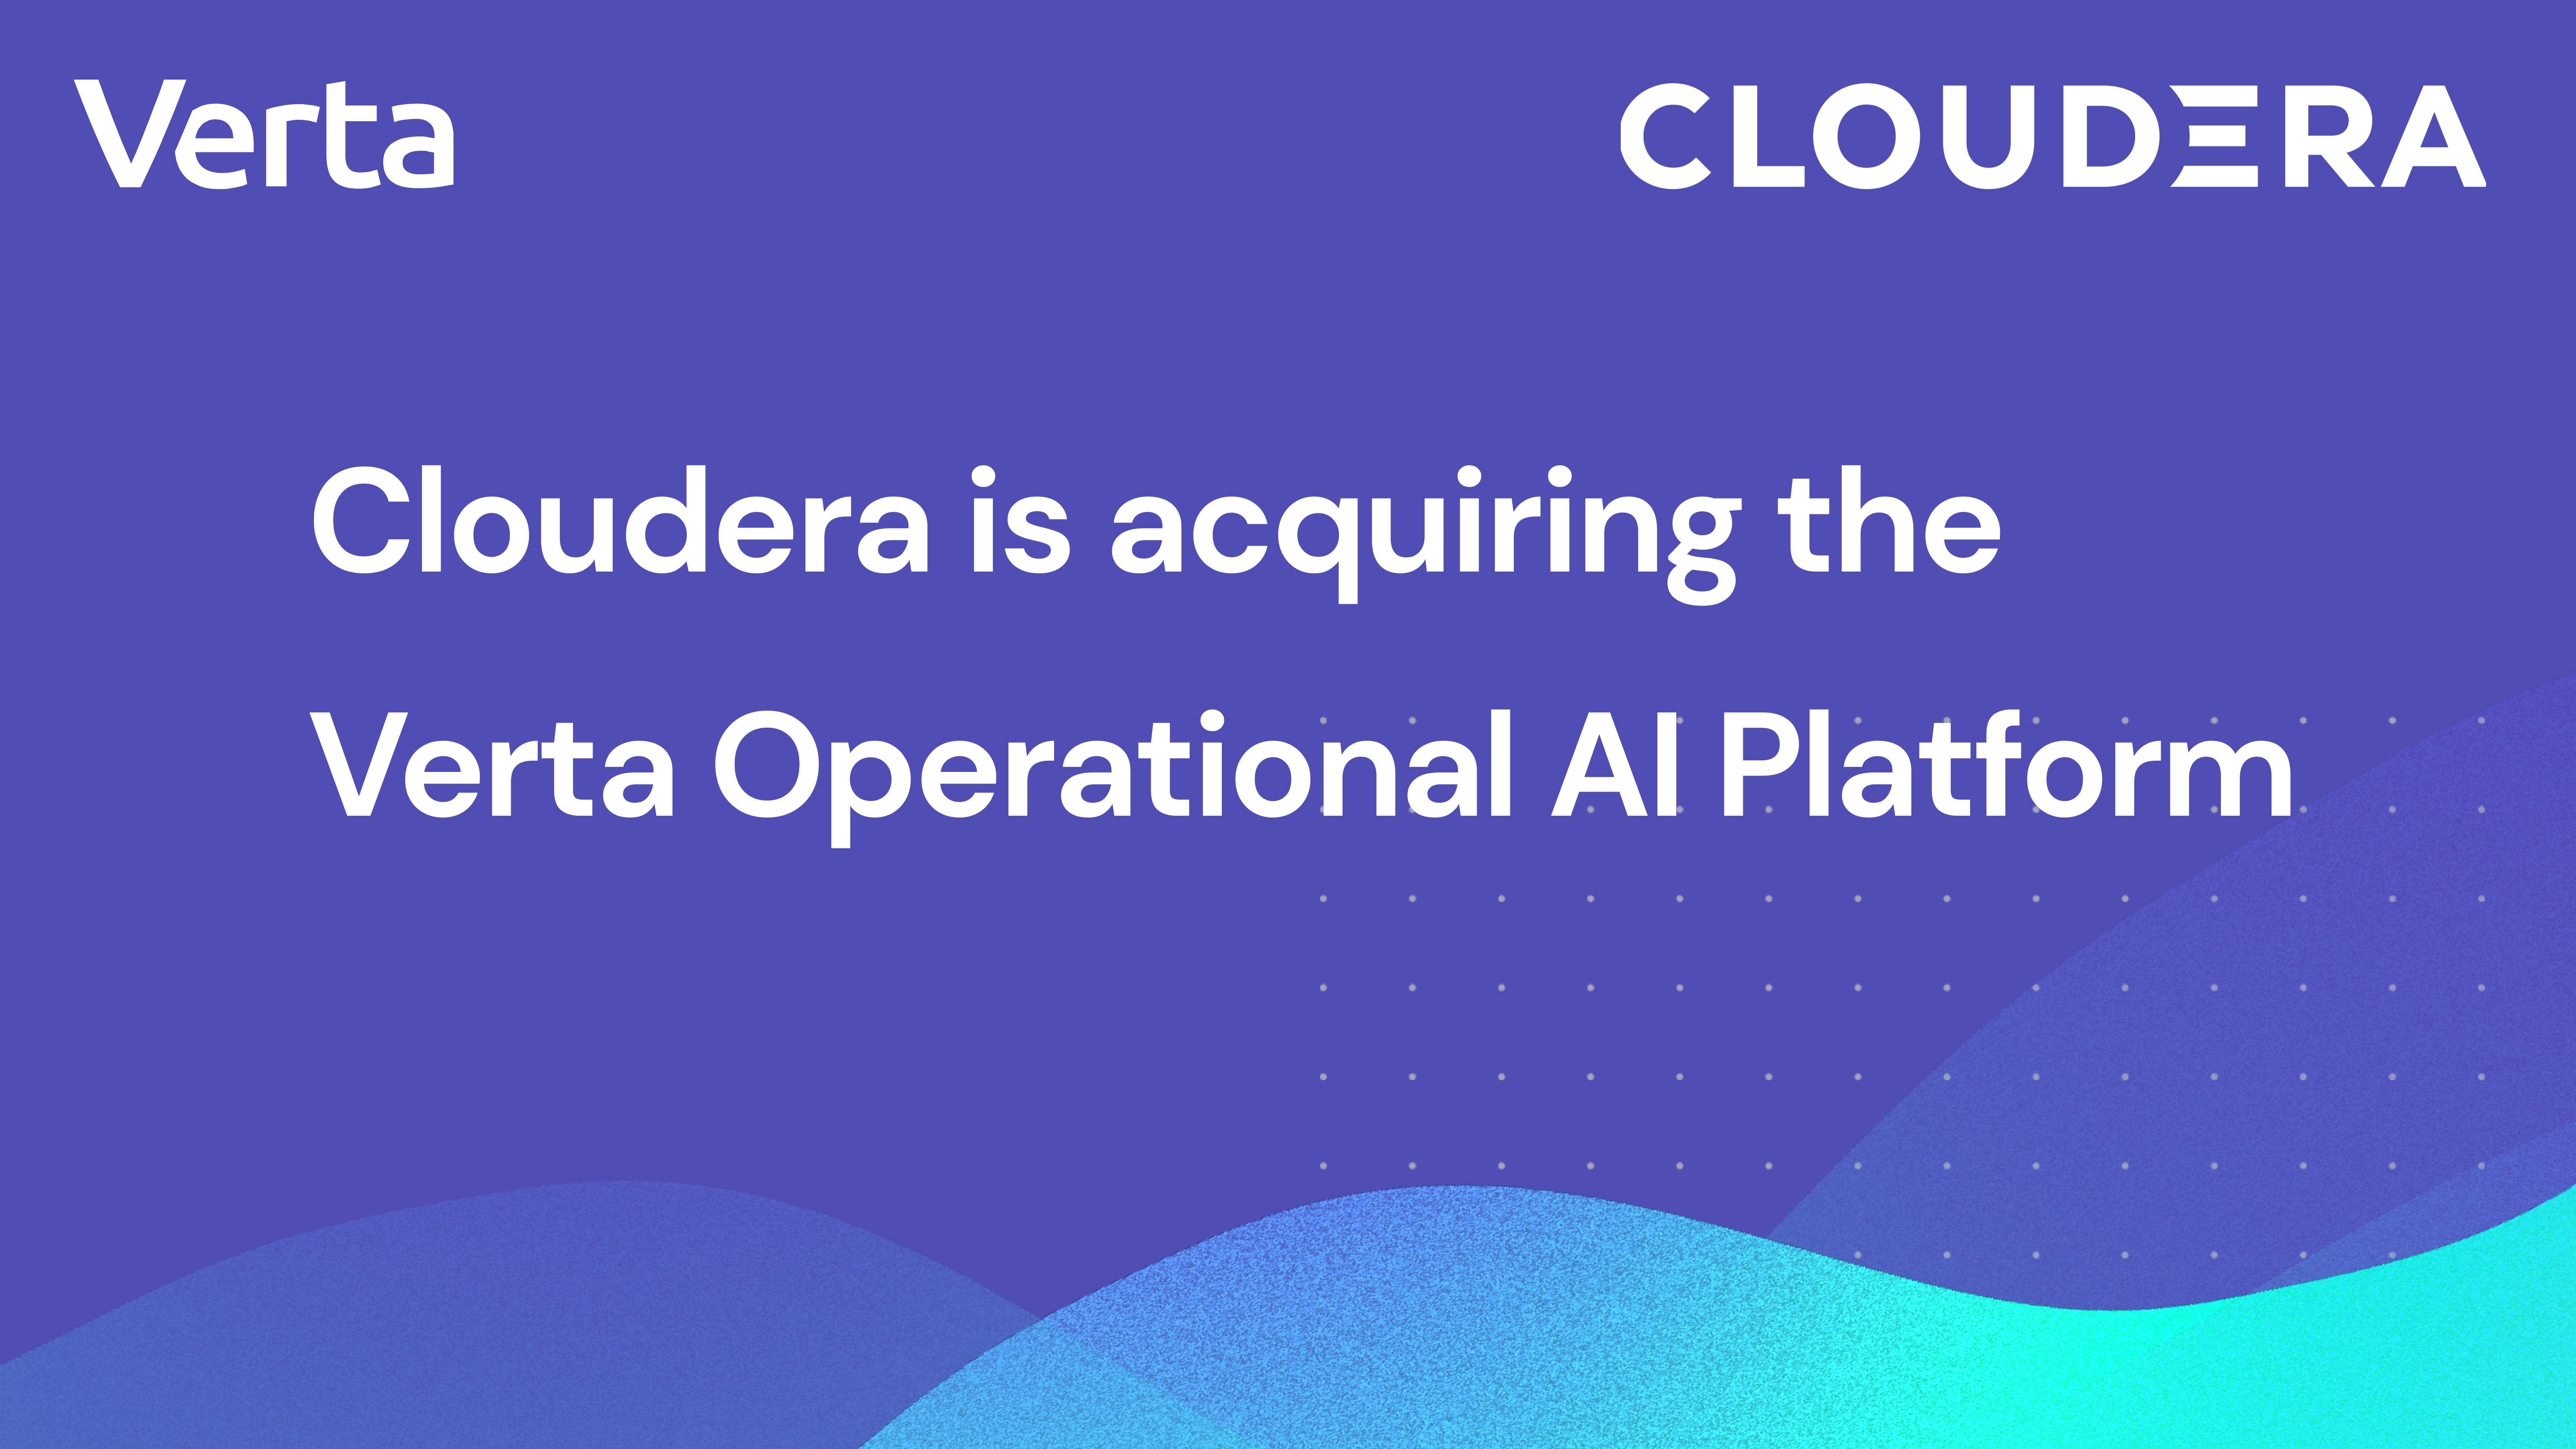 Cloudera acquires Verta Operational AI Platform to bring trusted, hybrid AI to the enterprise